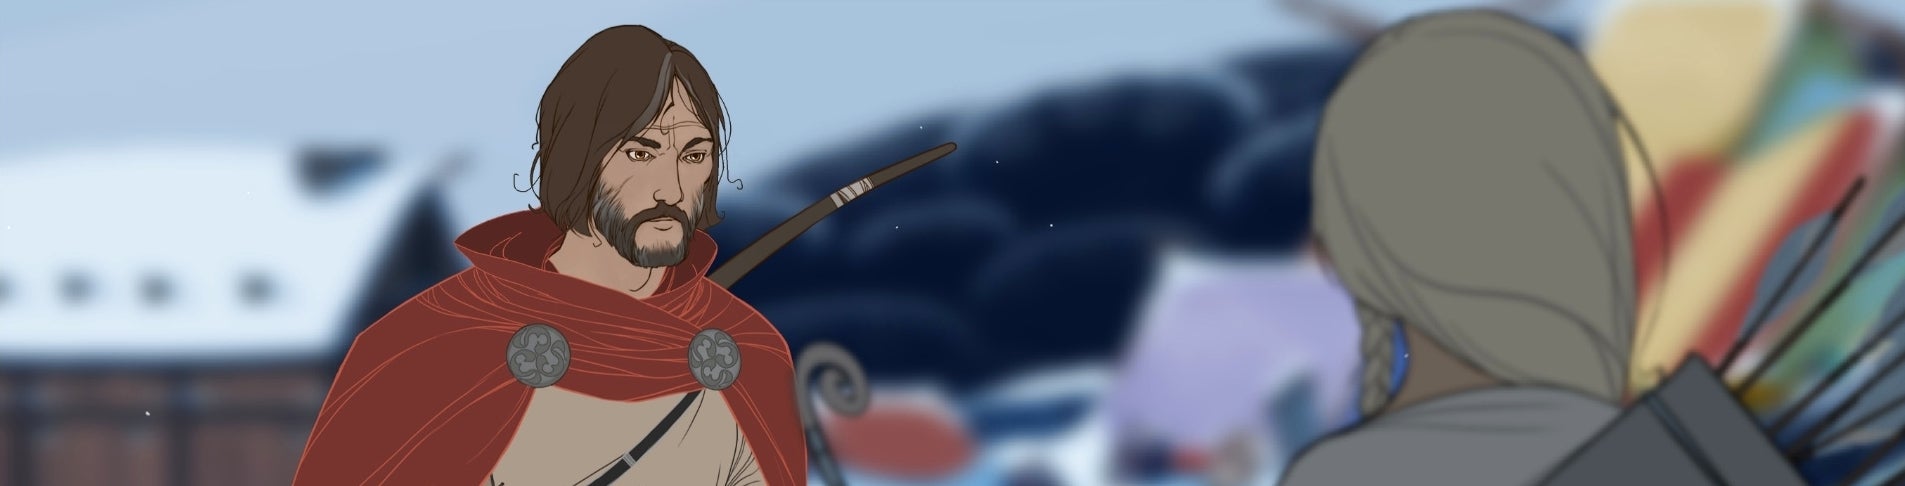 Image for The Banner Saga: Much more than you're expecting